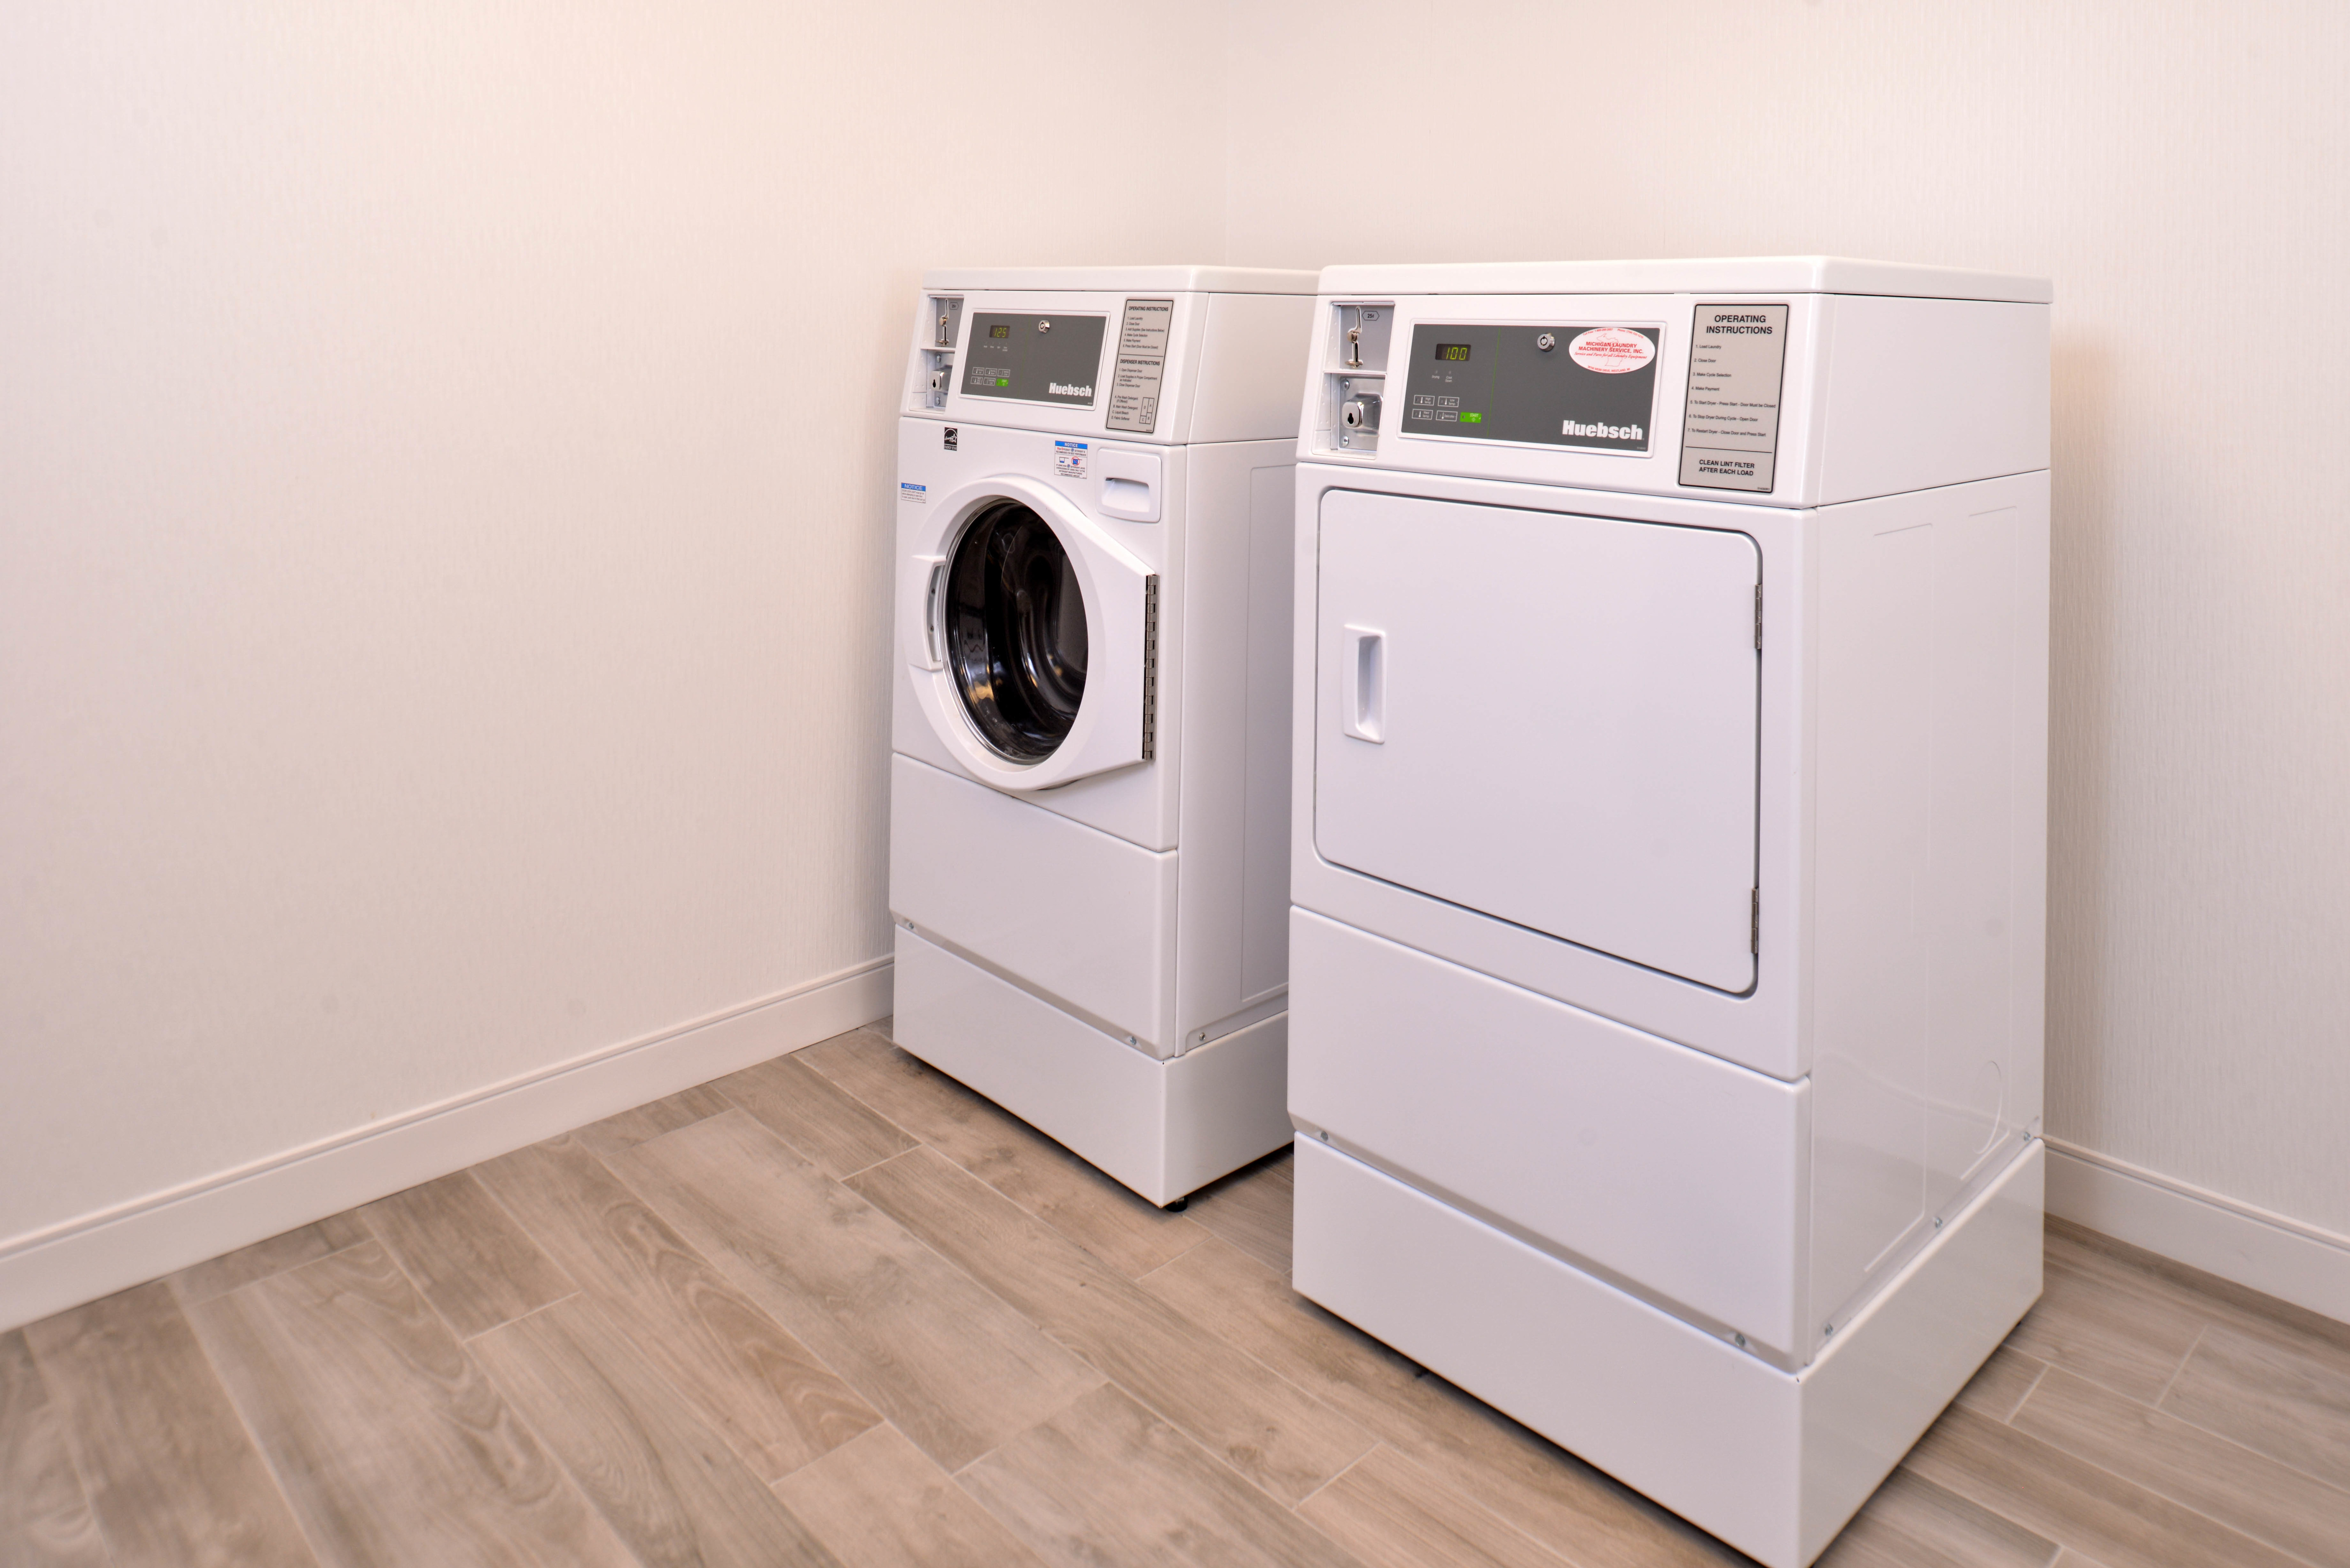 On-site Laundry Room